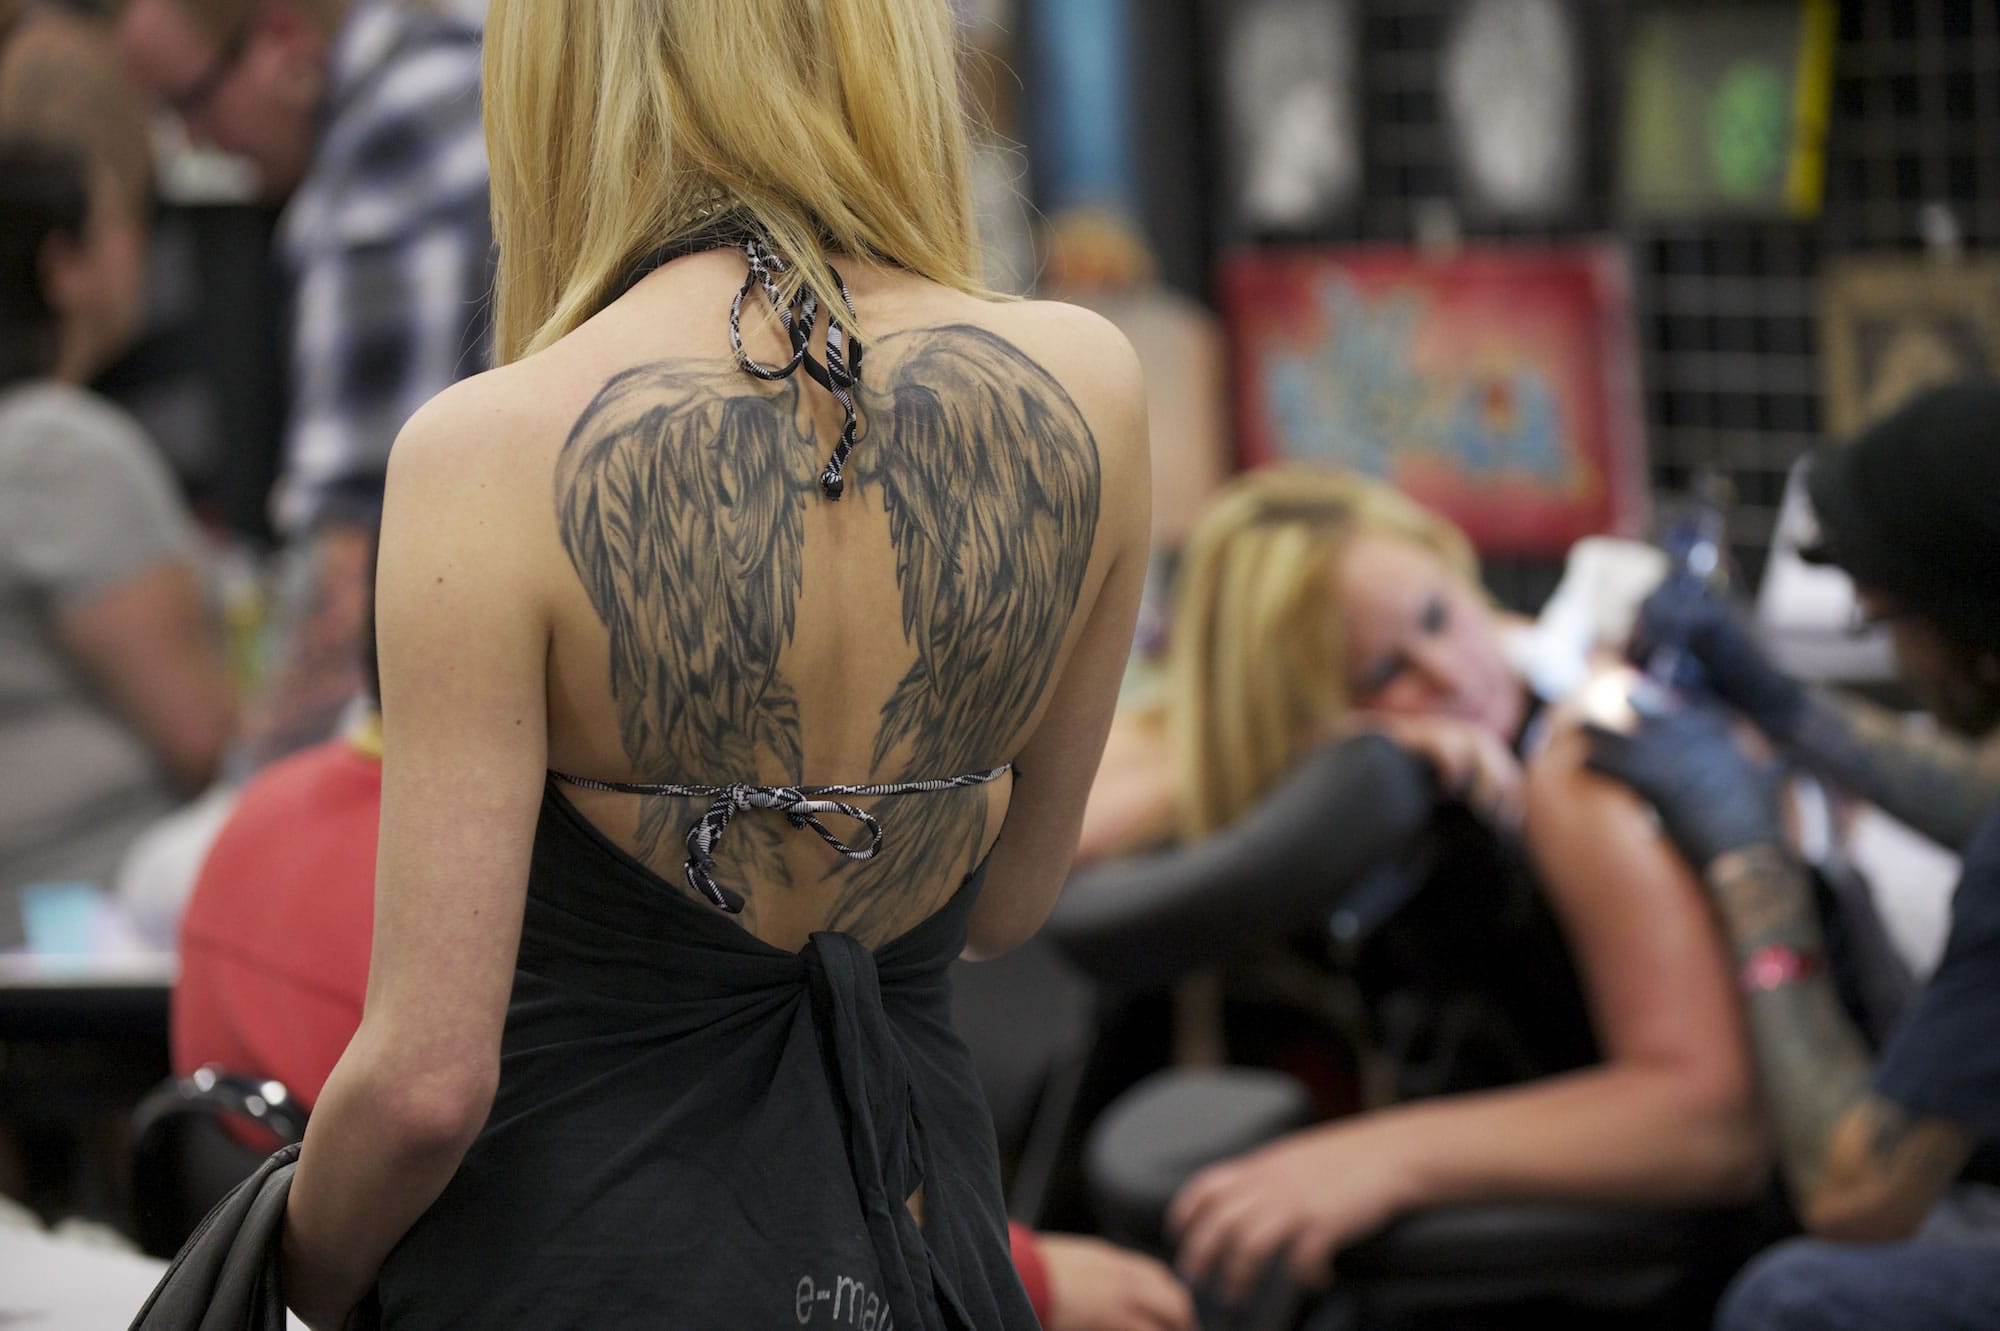 Tattoo artist Heather Mozo of Portland shows off a tattoo of wings on her back.